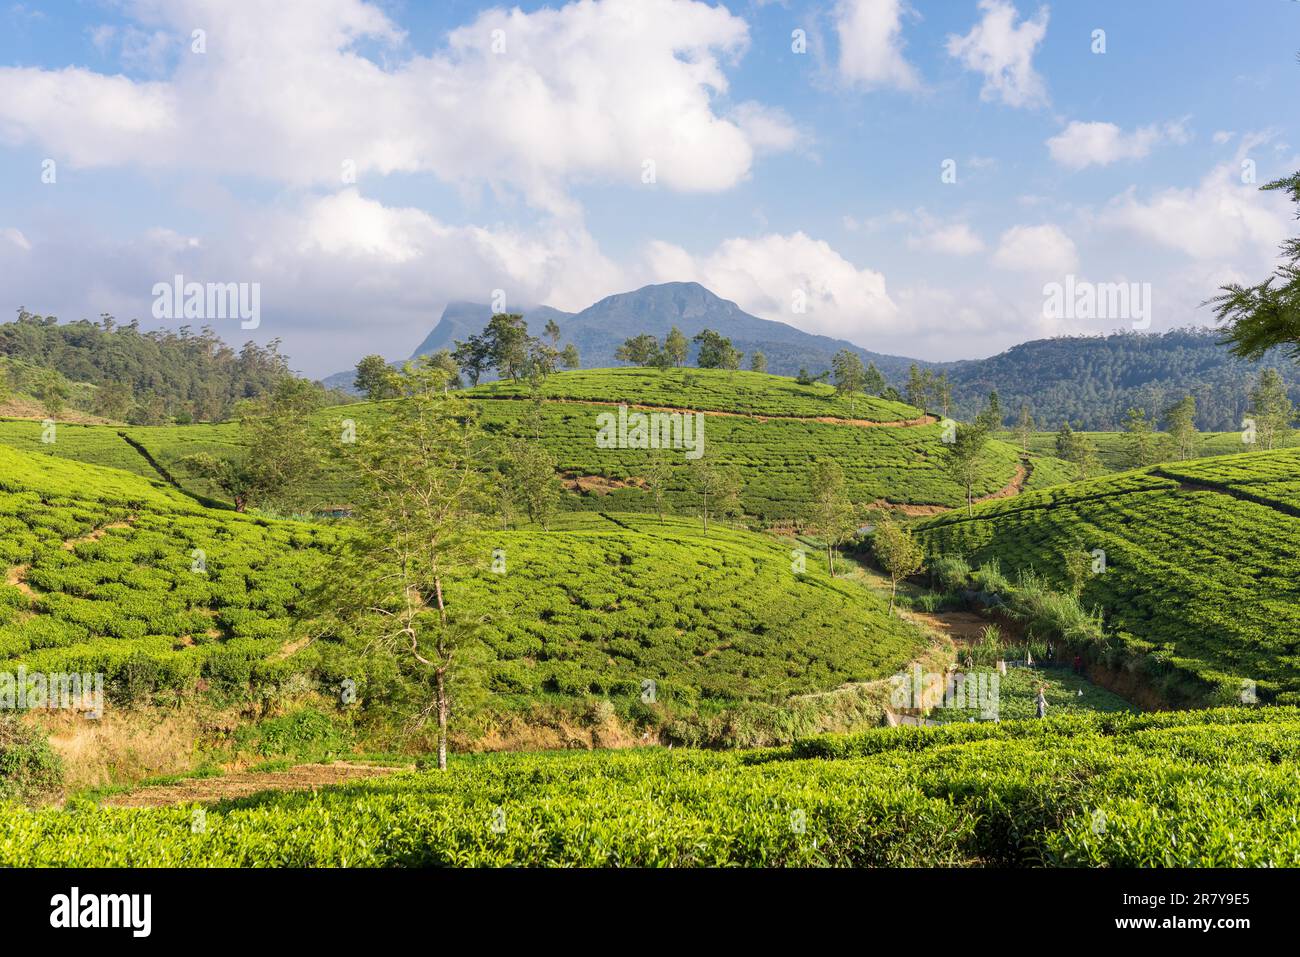 Tea plantation near the town Nuwara Eliya, approx 1900m above sea level. Tea production is on of the main economic sources of the country. Sri Lanka Stock Photo